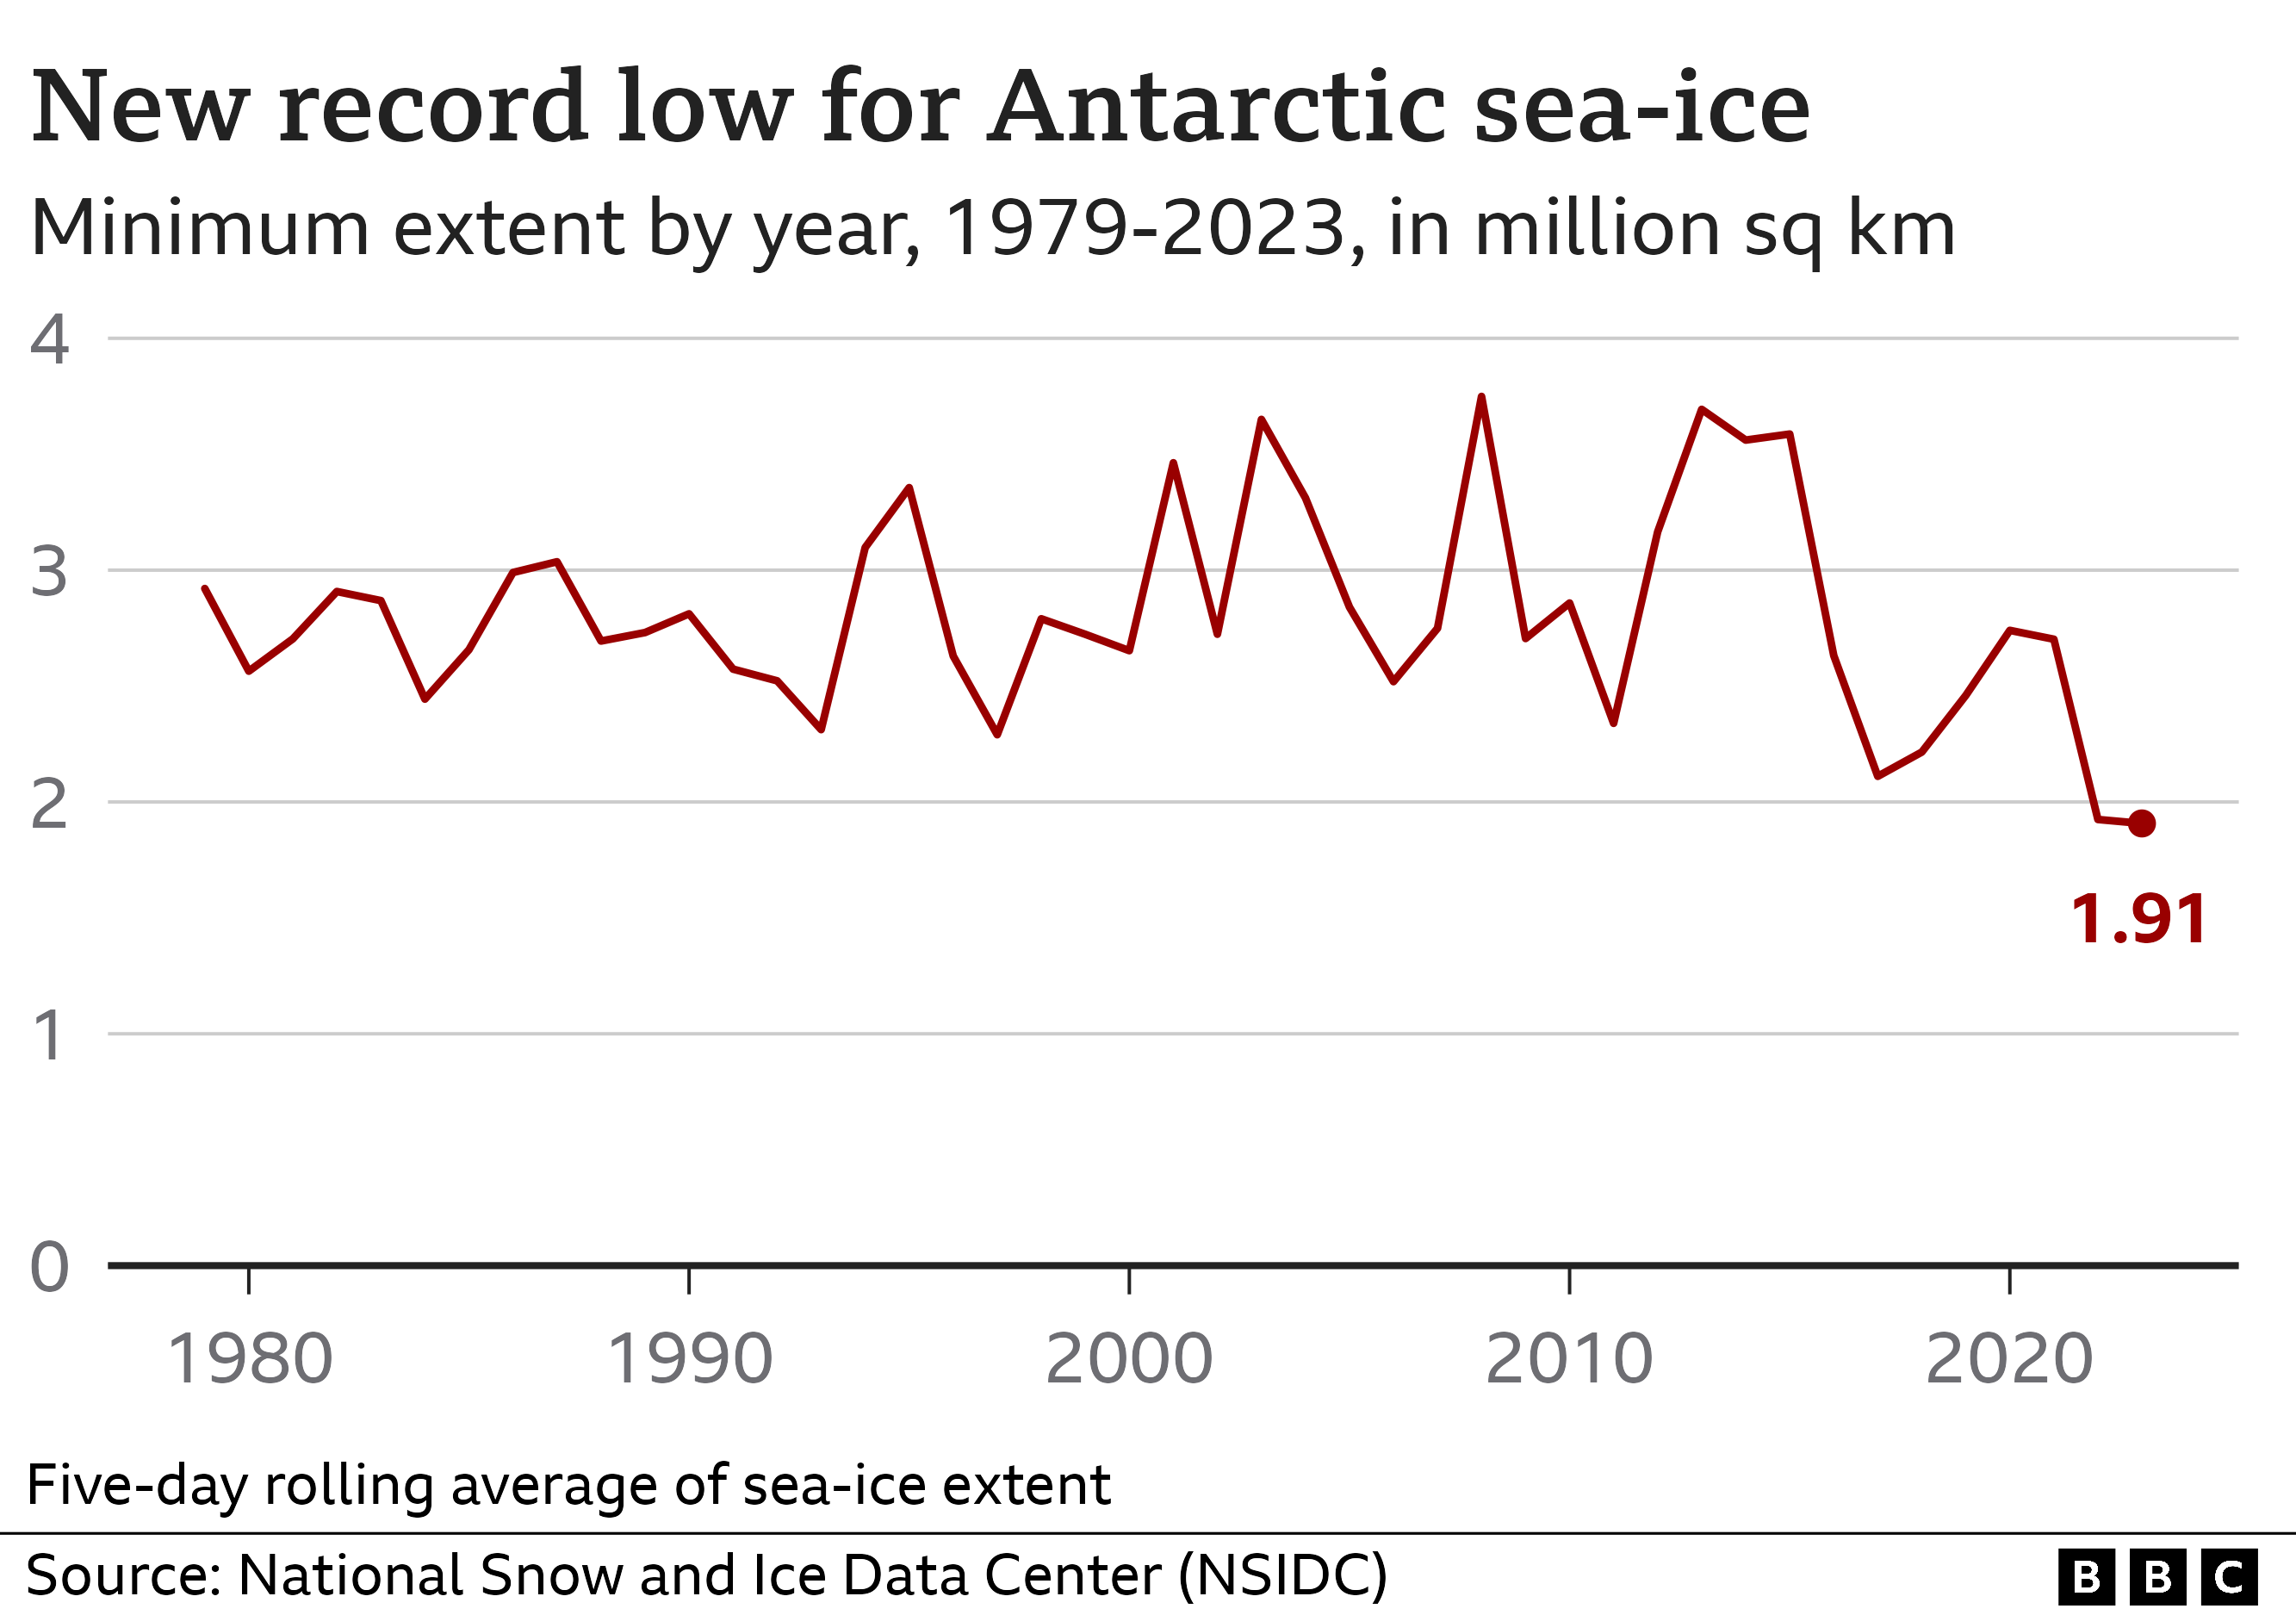 Line chart which depict the lowest point of measured sea-ice each year from 1979 to 2023. Although the line fluctuates considerably, there is a slight downward trend in recent years ending with a new record set in 2023 at 1.91 million square kilometres